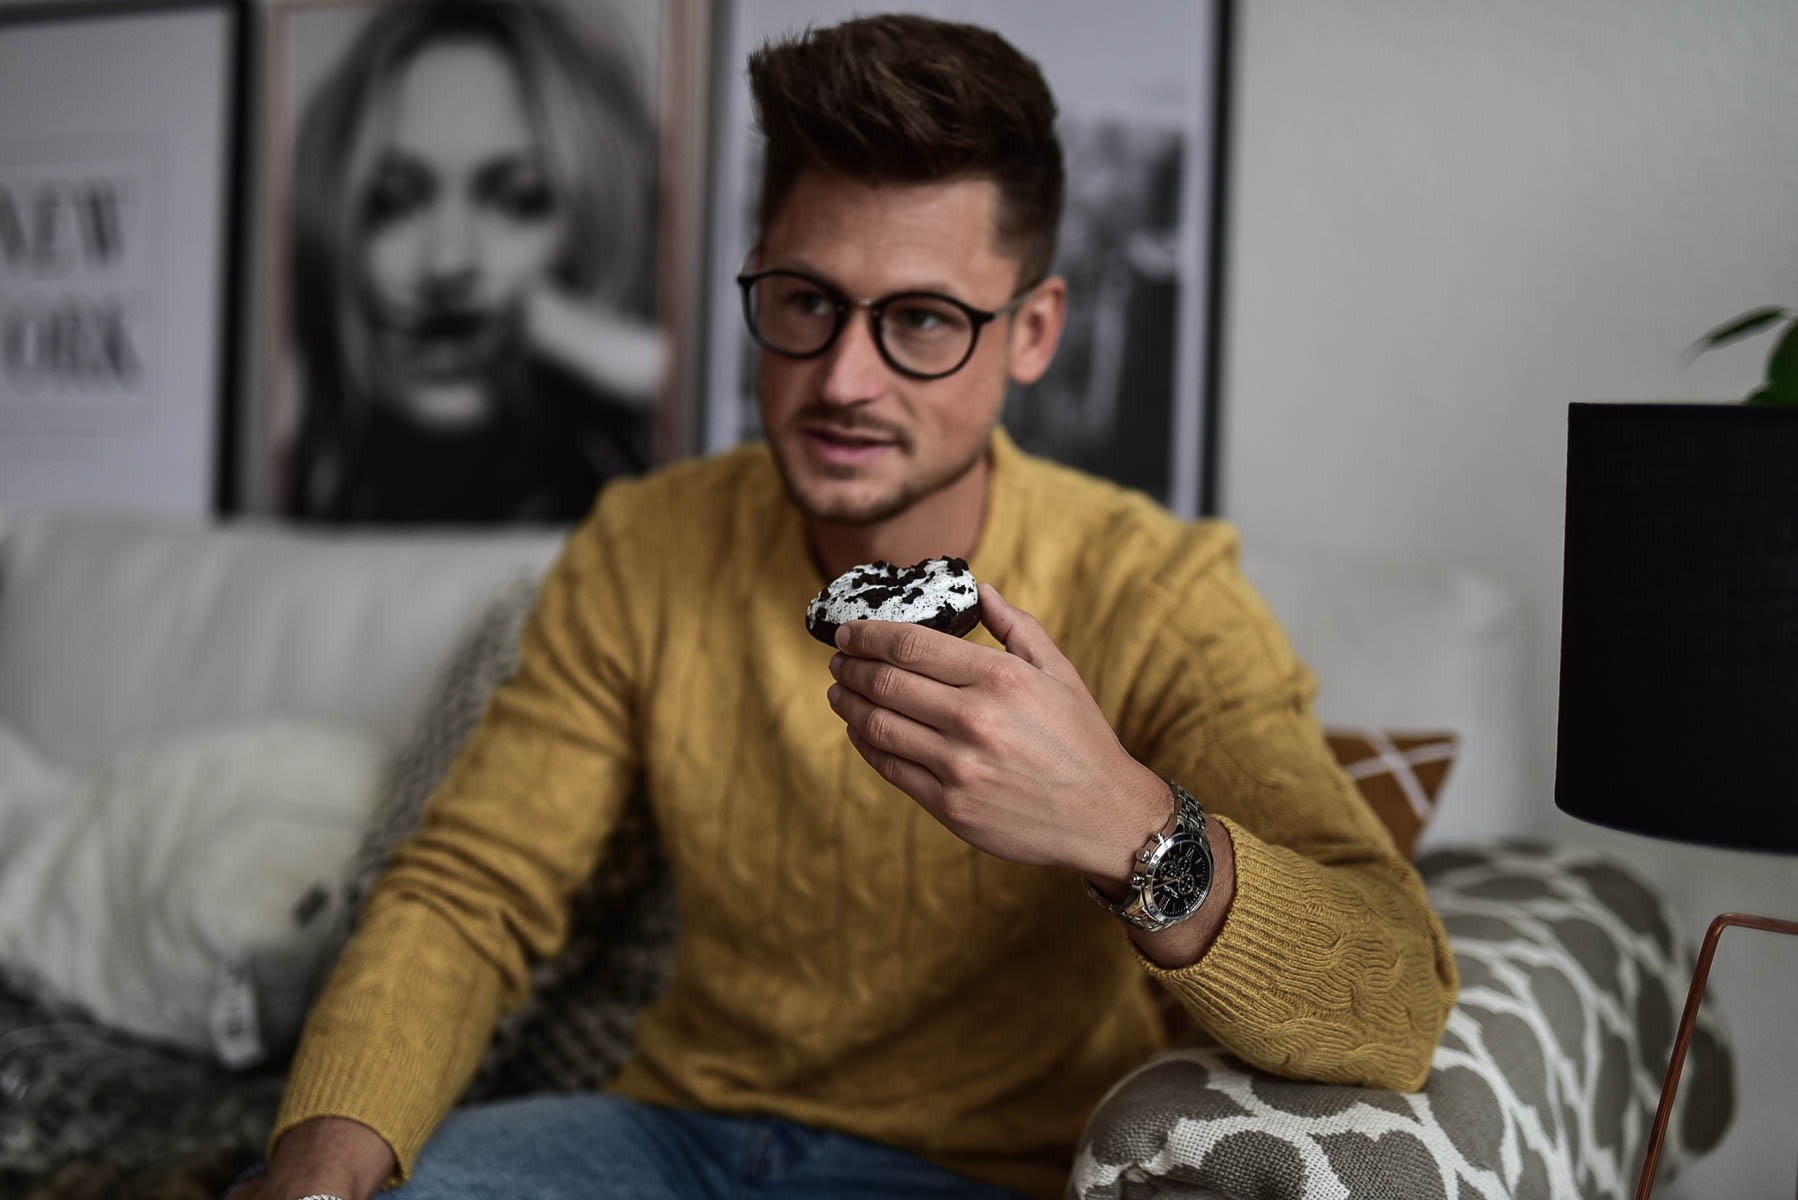 Tommeezjerry-Fashionblog-Lifestyleblog-Styleblog-Männerblog-Männer-Modeblog-Berlin-Berlinblog-Männermodeblog-Outfit-Sweater-Yellow-Ripped-Jeans-Oreo-Donut